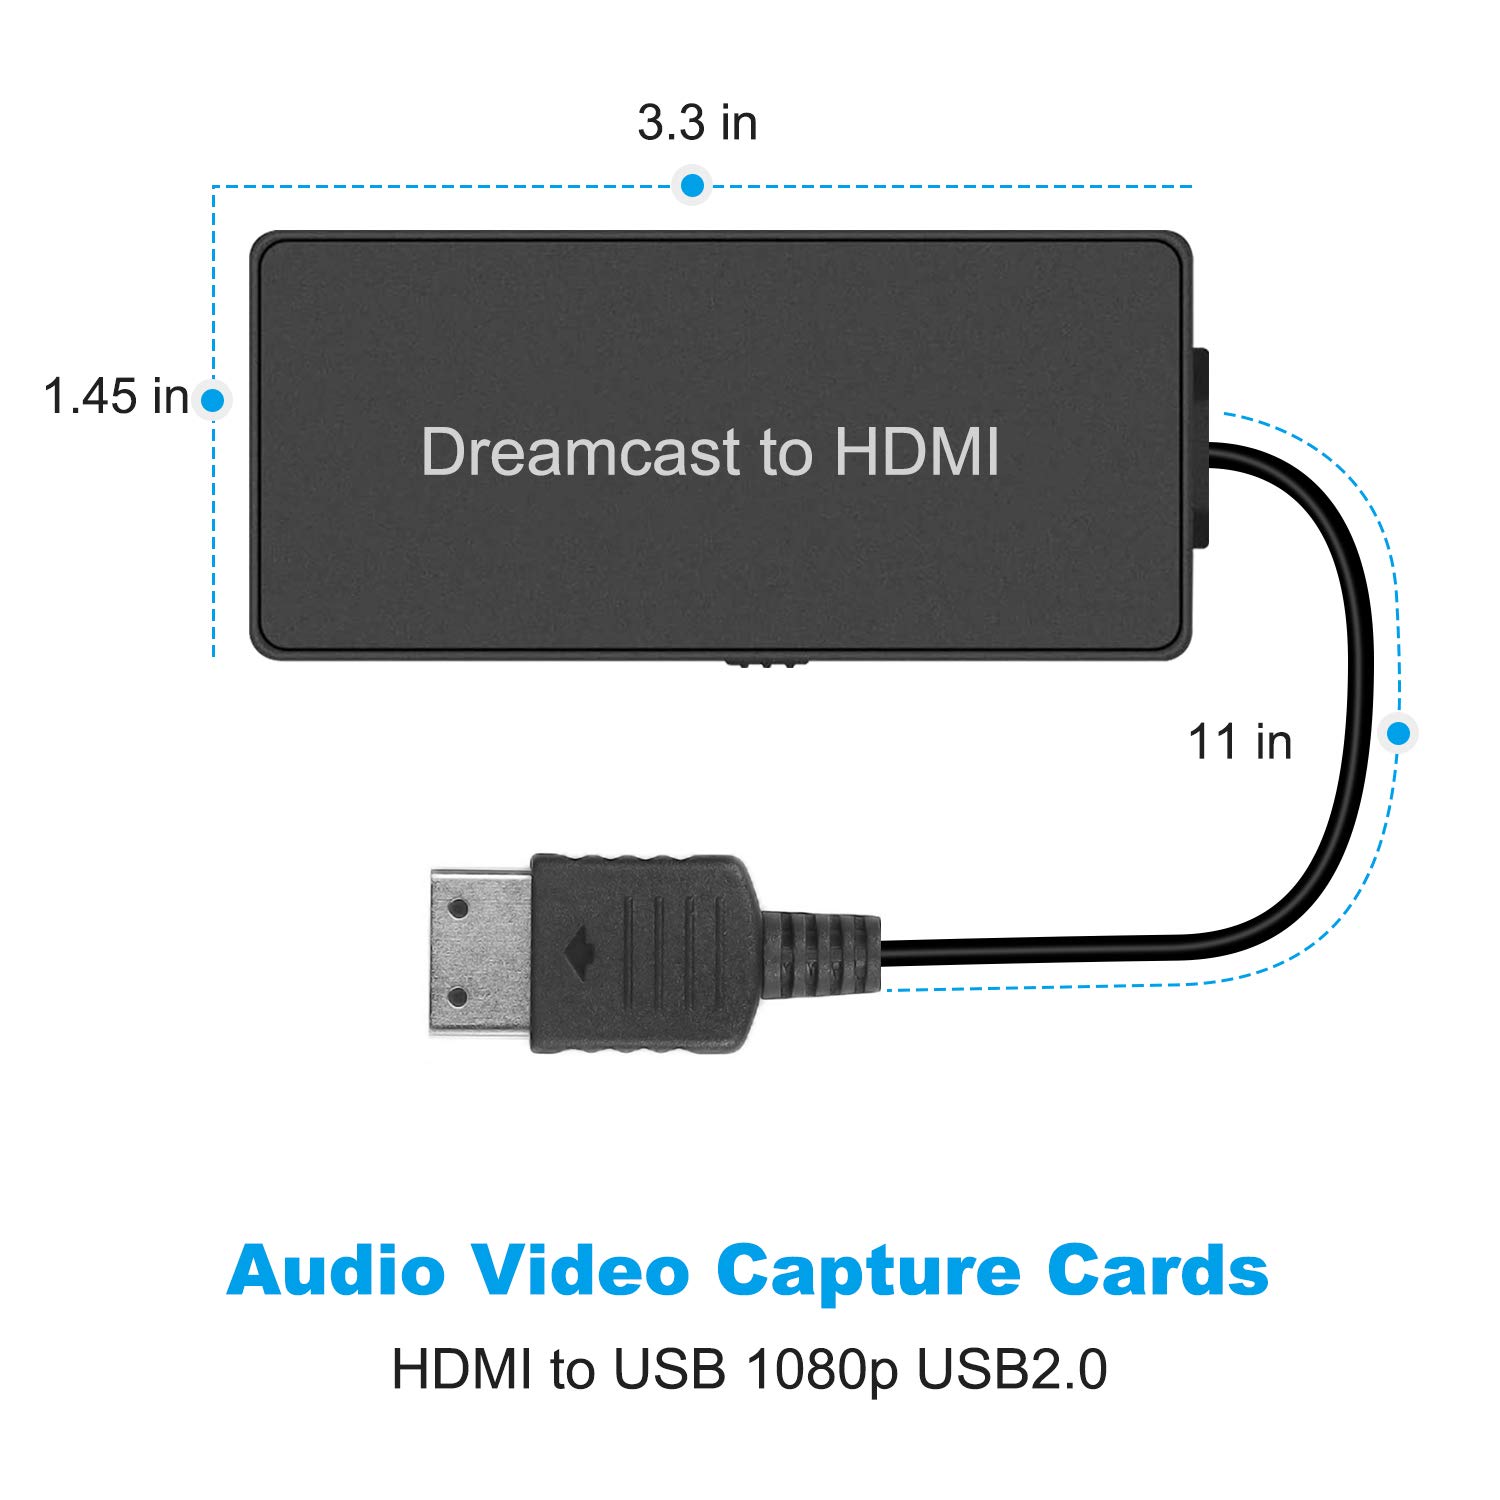 Buy Dreamcast to HDMI Converter Supports 16:9/ 4:3 Switching, HD Link Cable  for Sega Dreamcast, HDMI Cable for Sega Dreamcast (Sega DC)